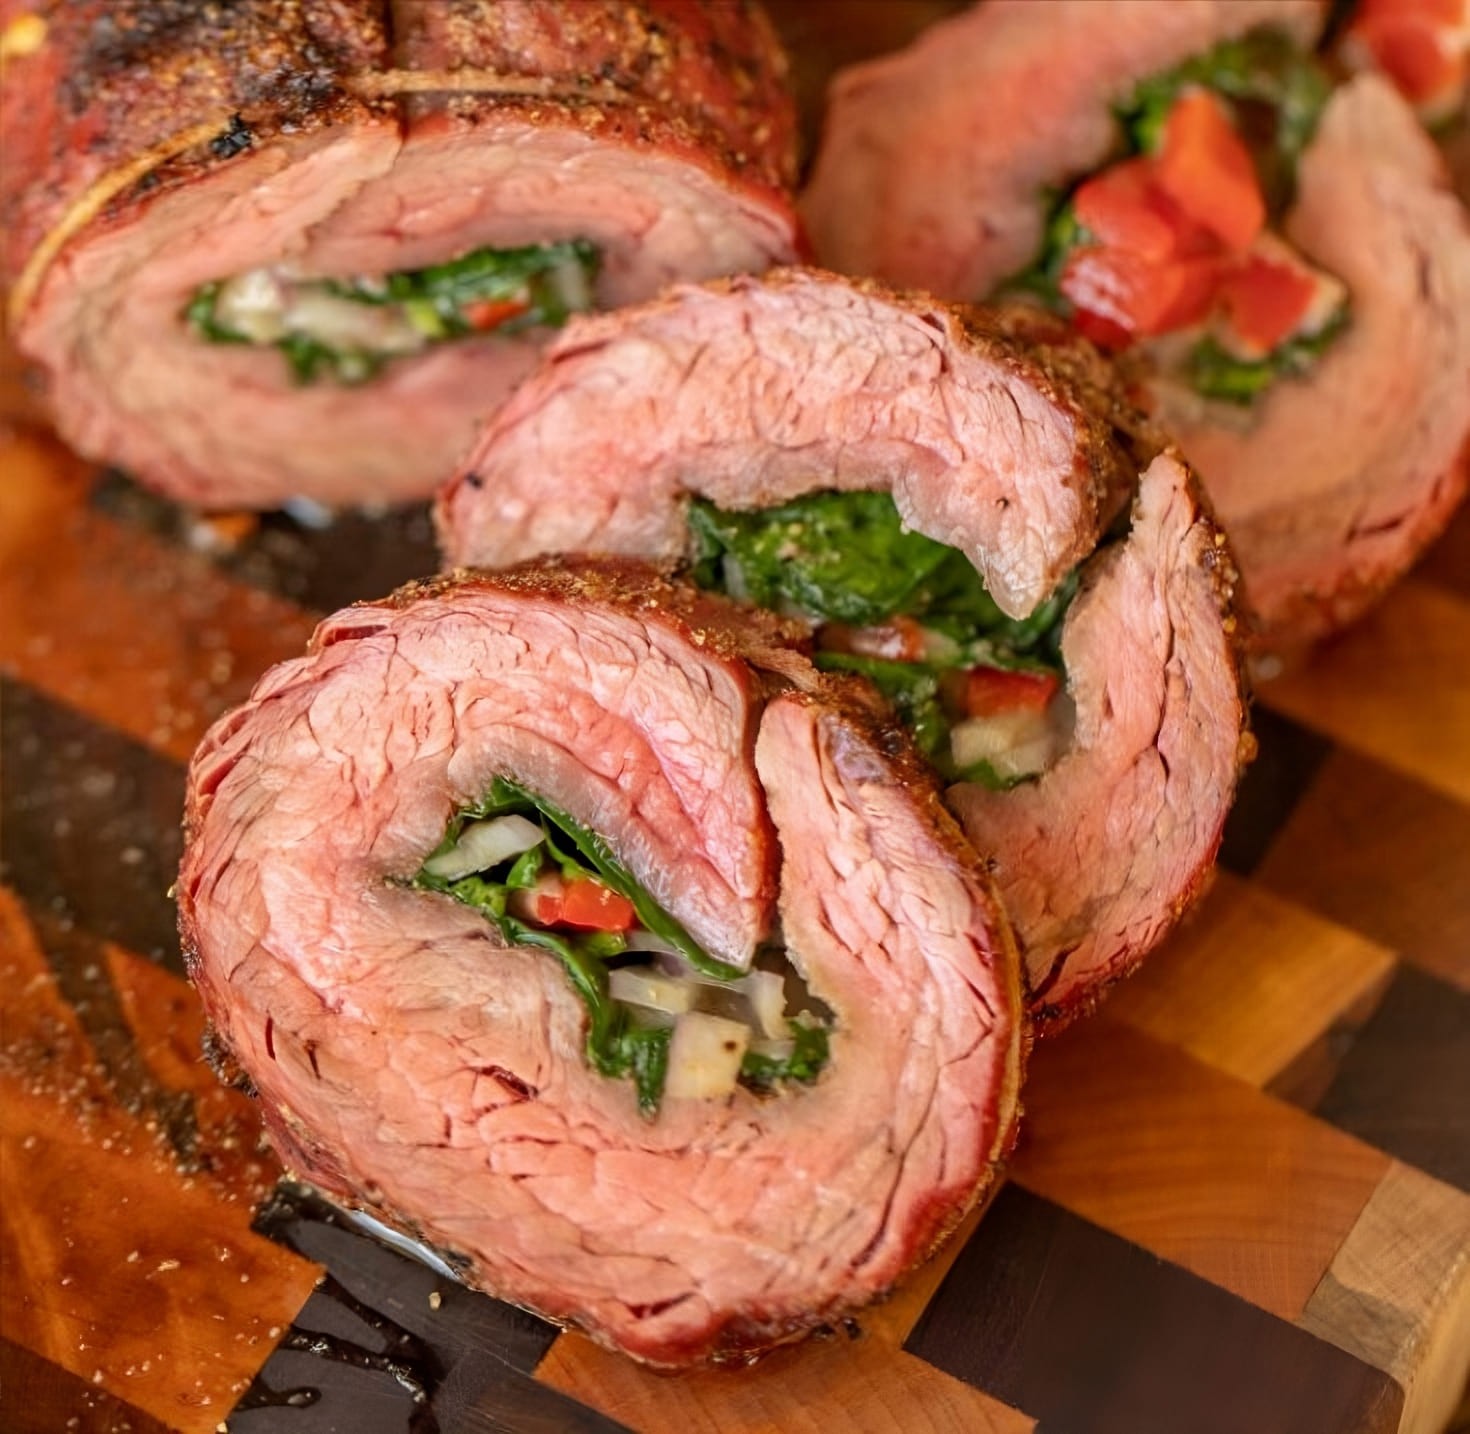 A Flavorful Twist: Stuffed Flank Steak with Spinach, Peppers, and Cheese